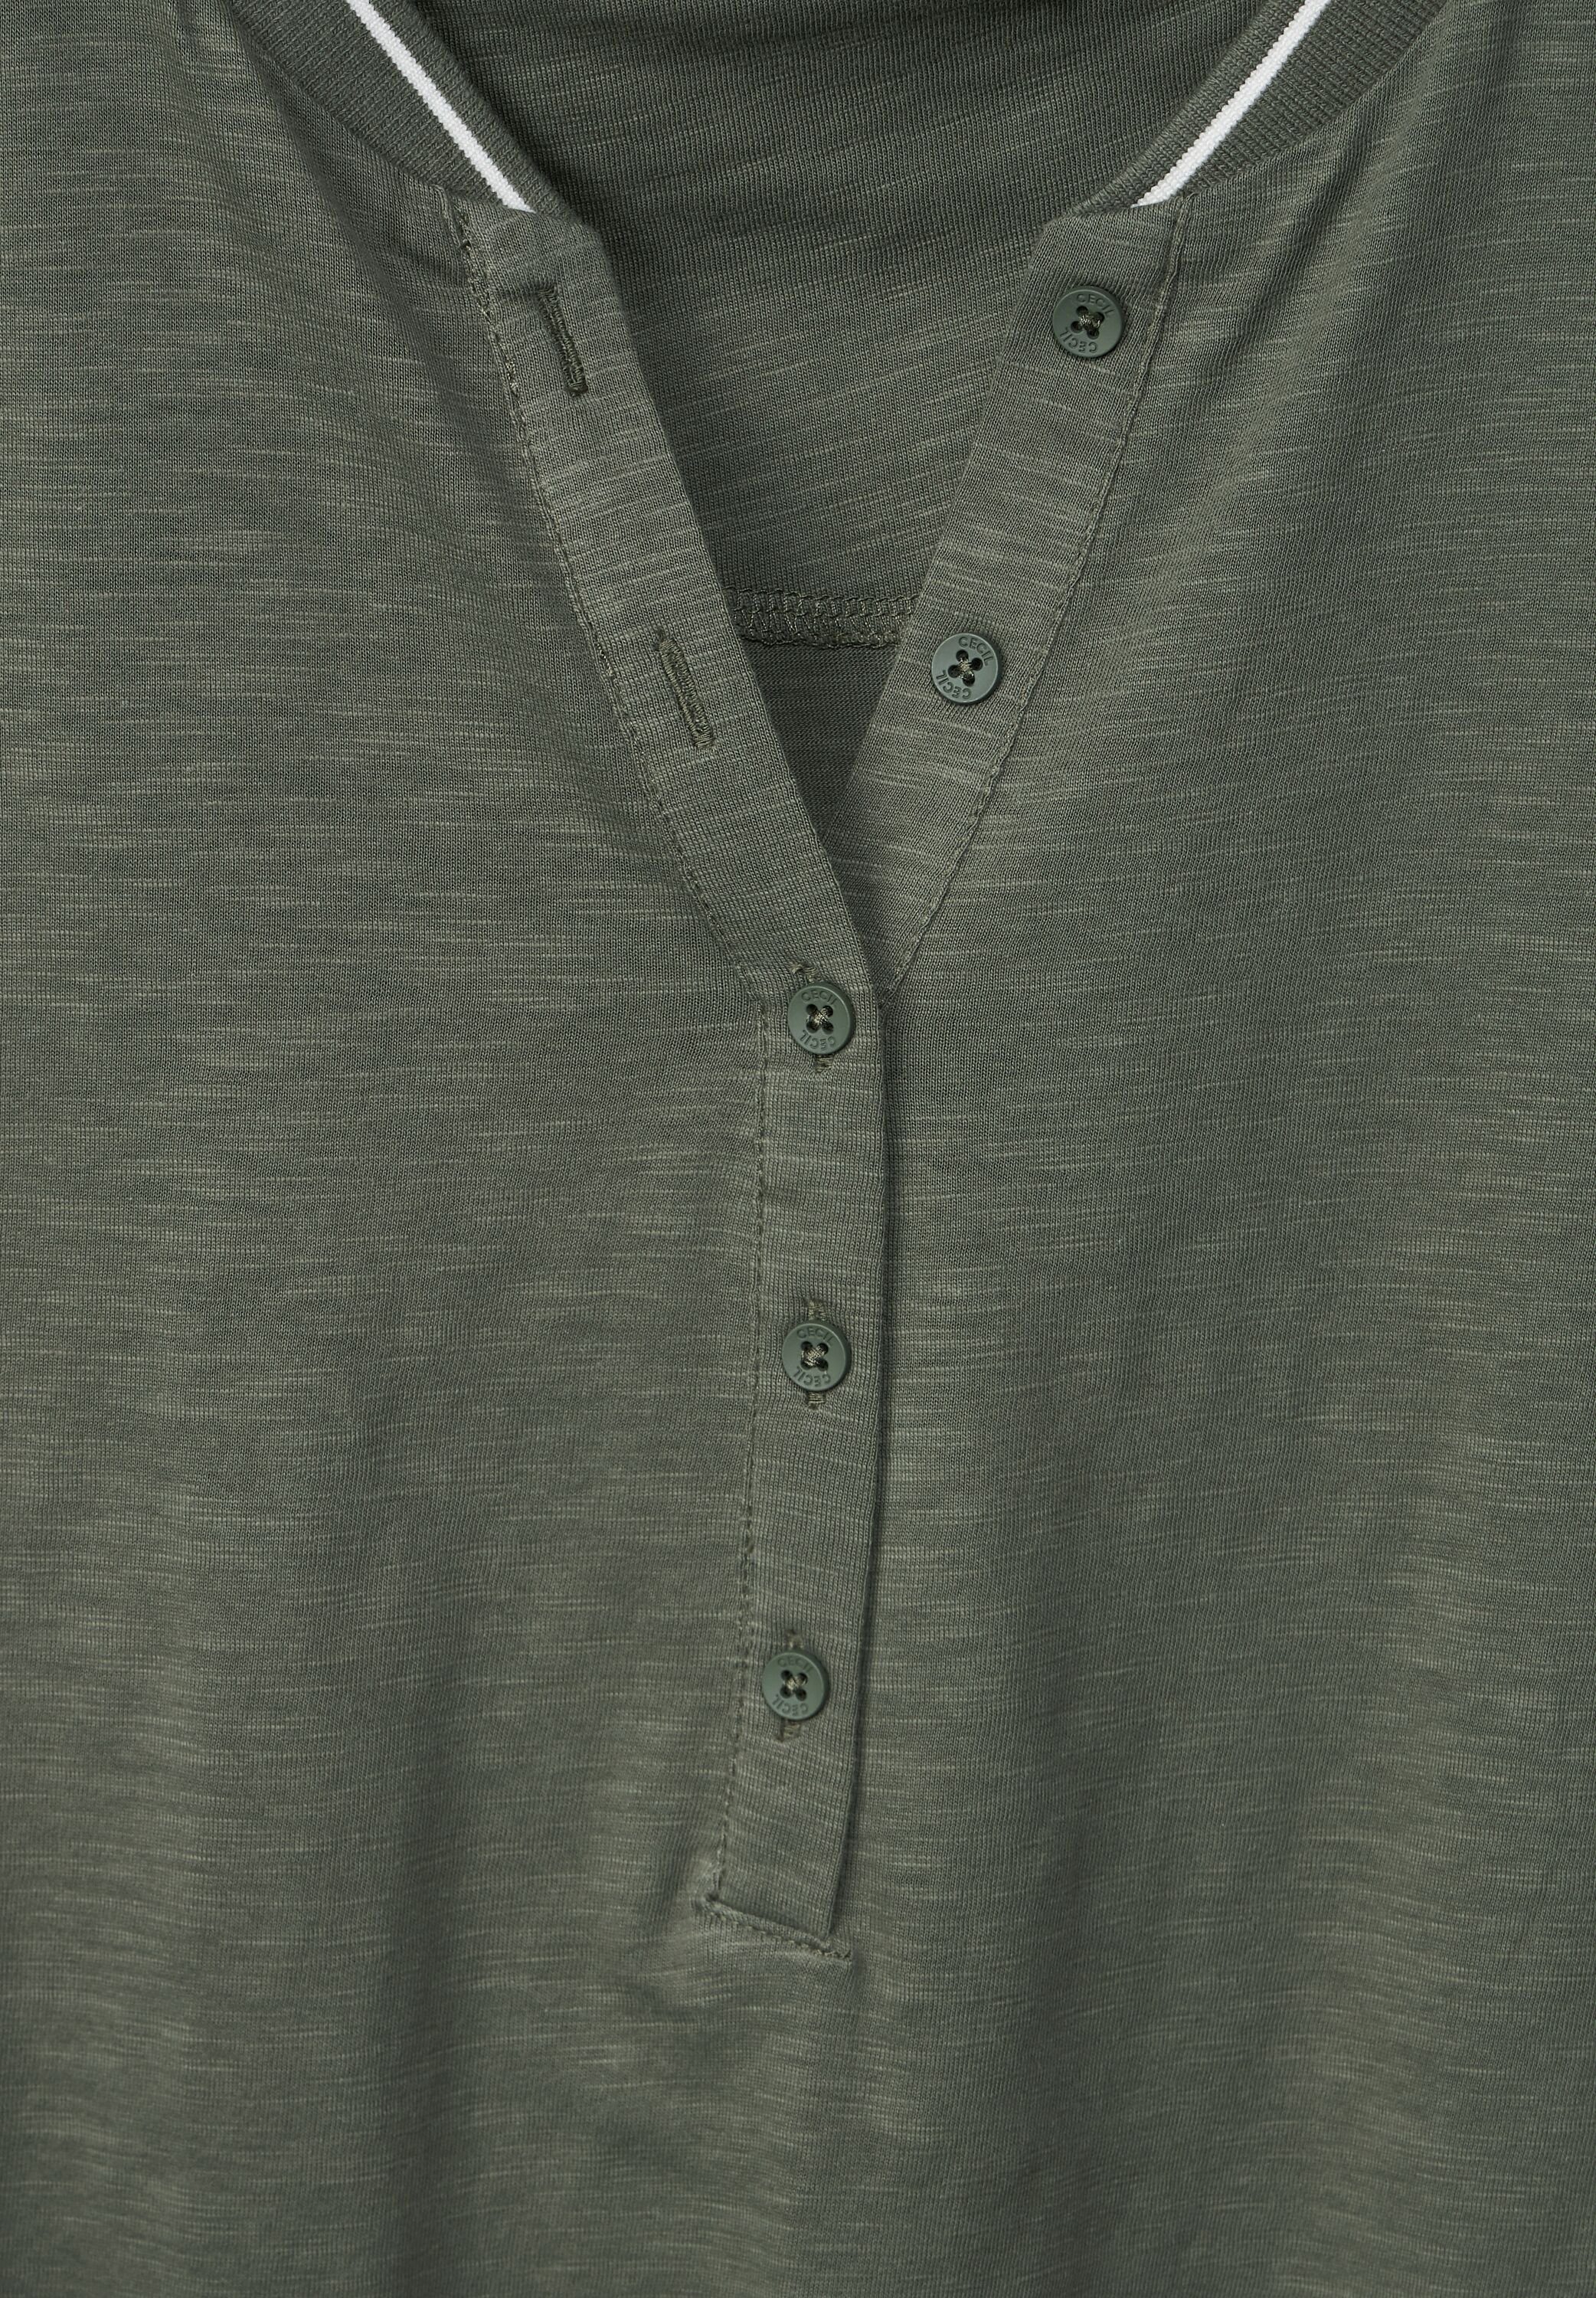 Cecil 3/4-Arm-Shirt in desert green olive Unifarbe